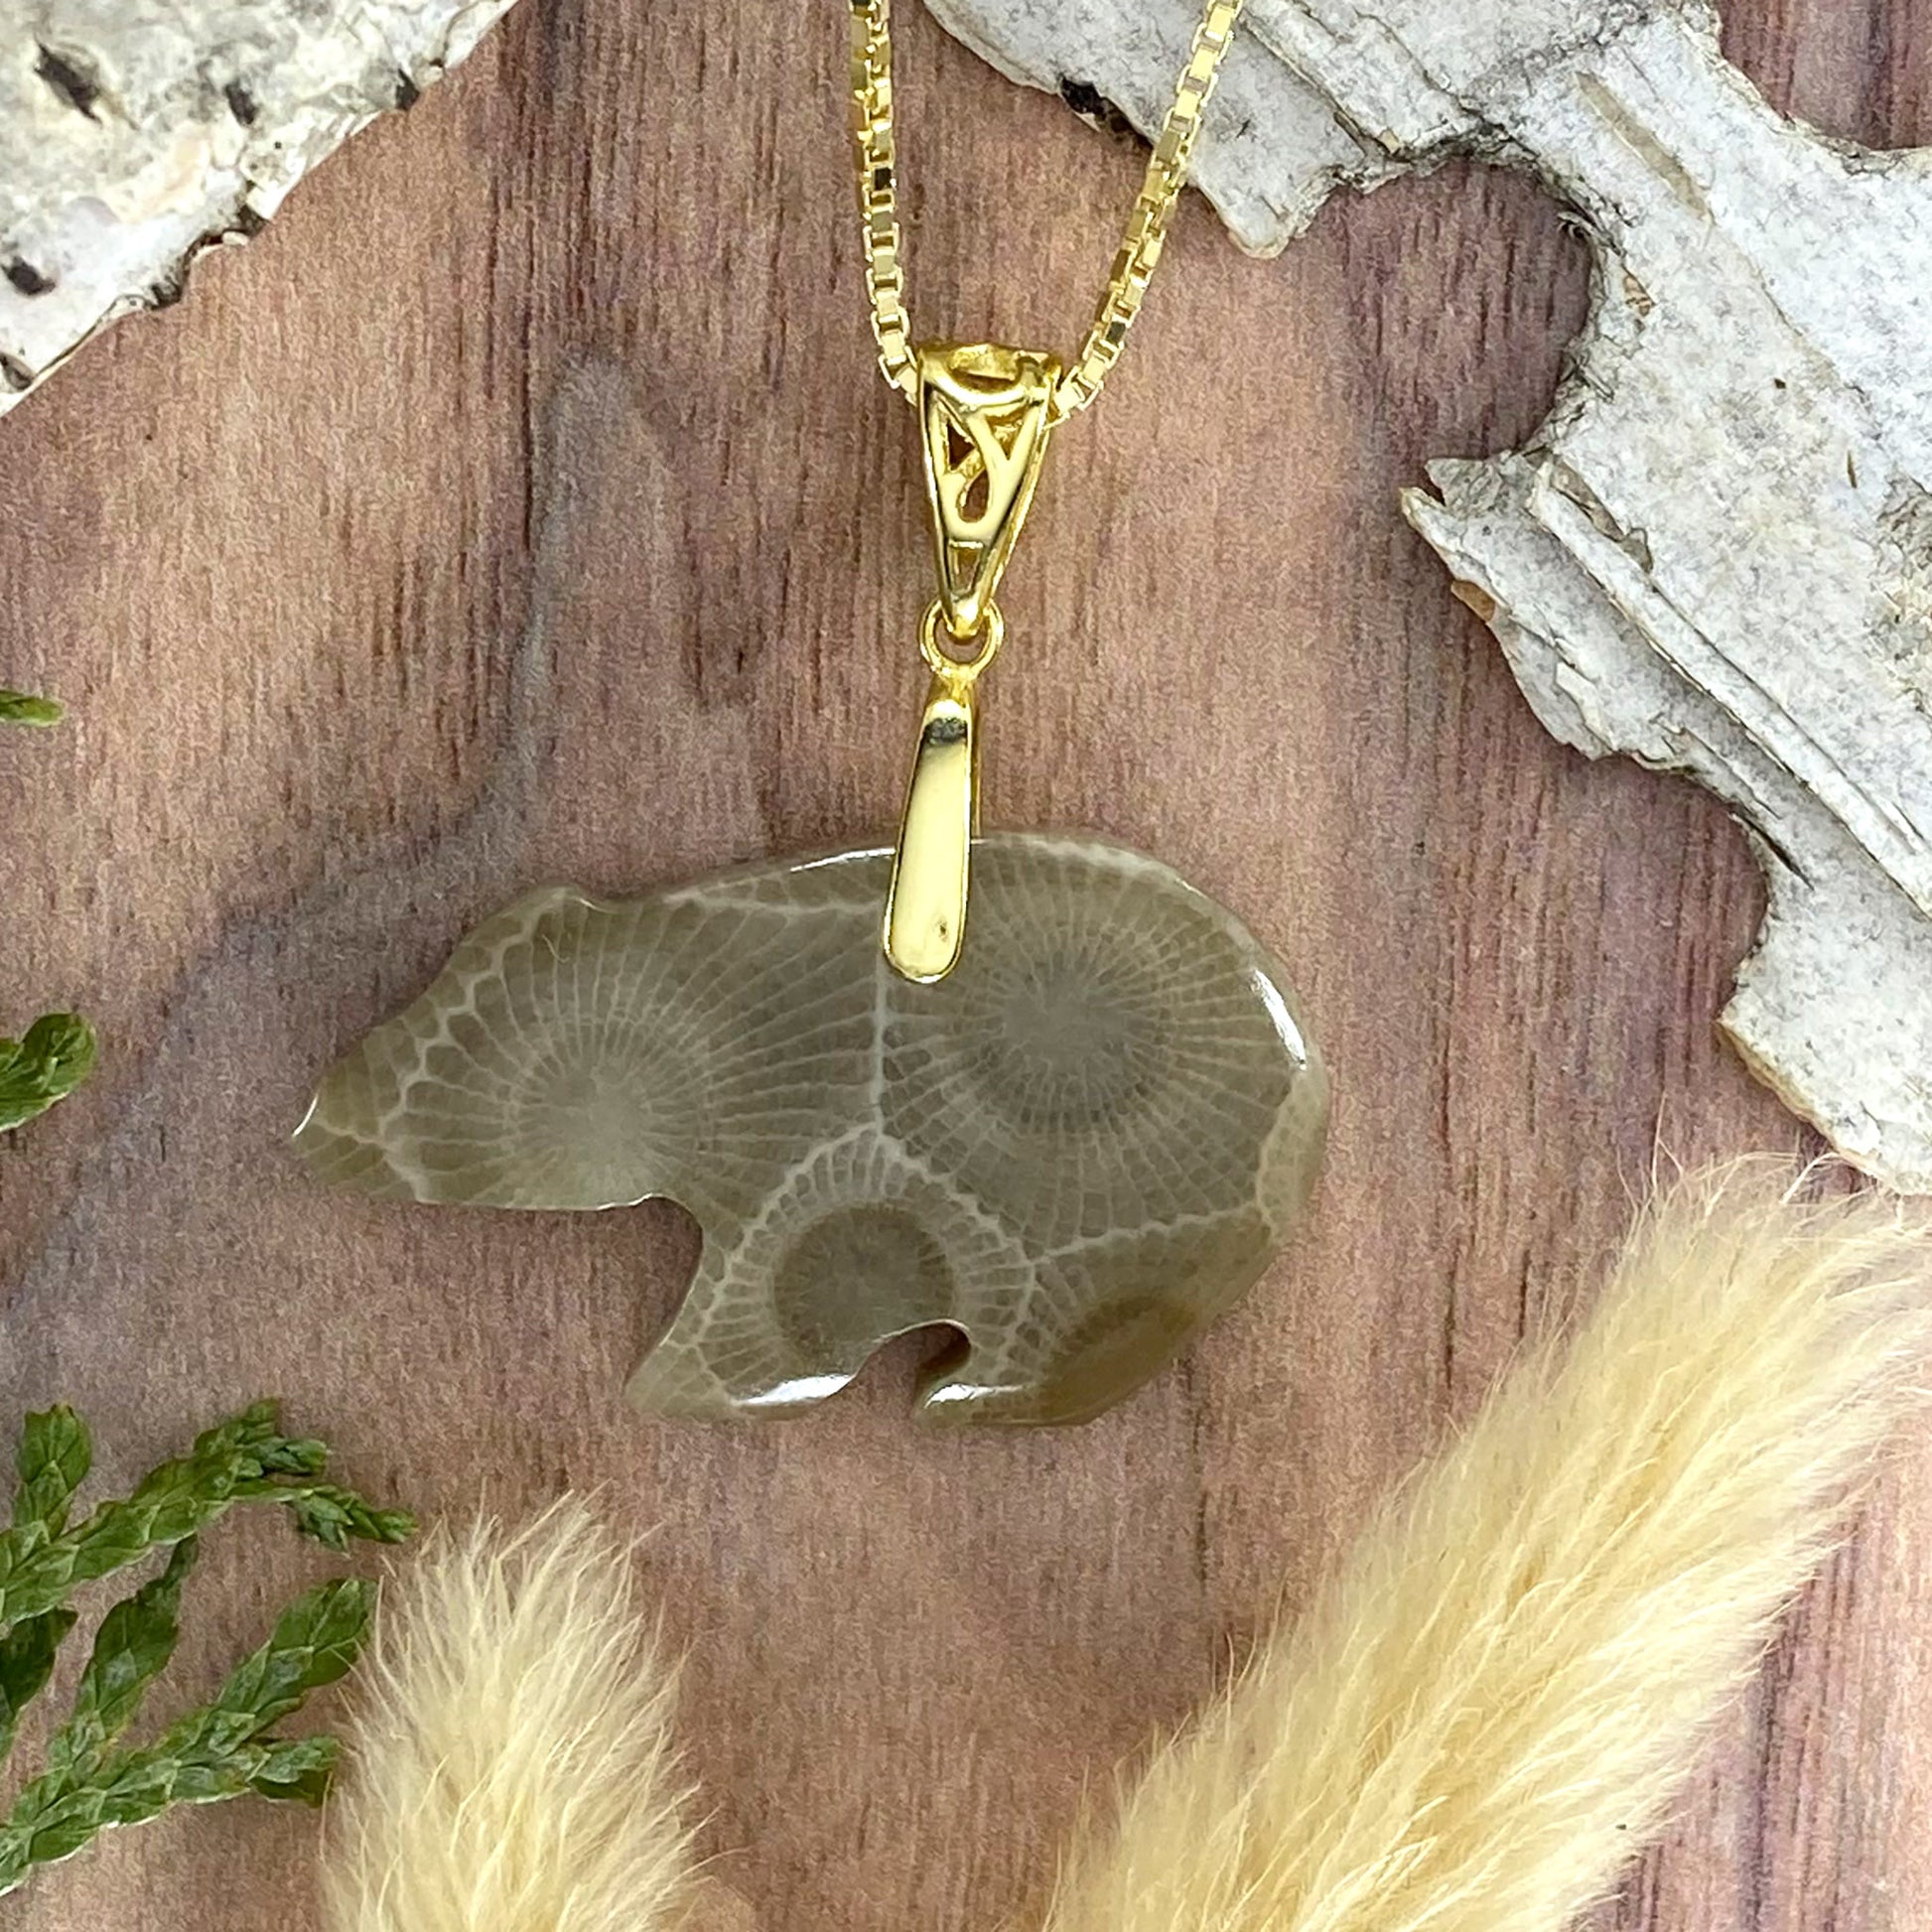 Petoskey Stone Bear Pendant Necklace A Front View - Stone Treasures by the Lake